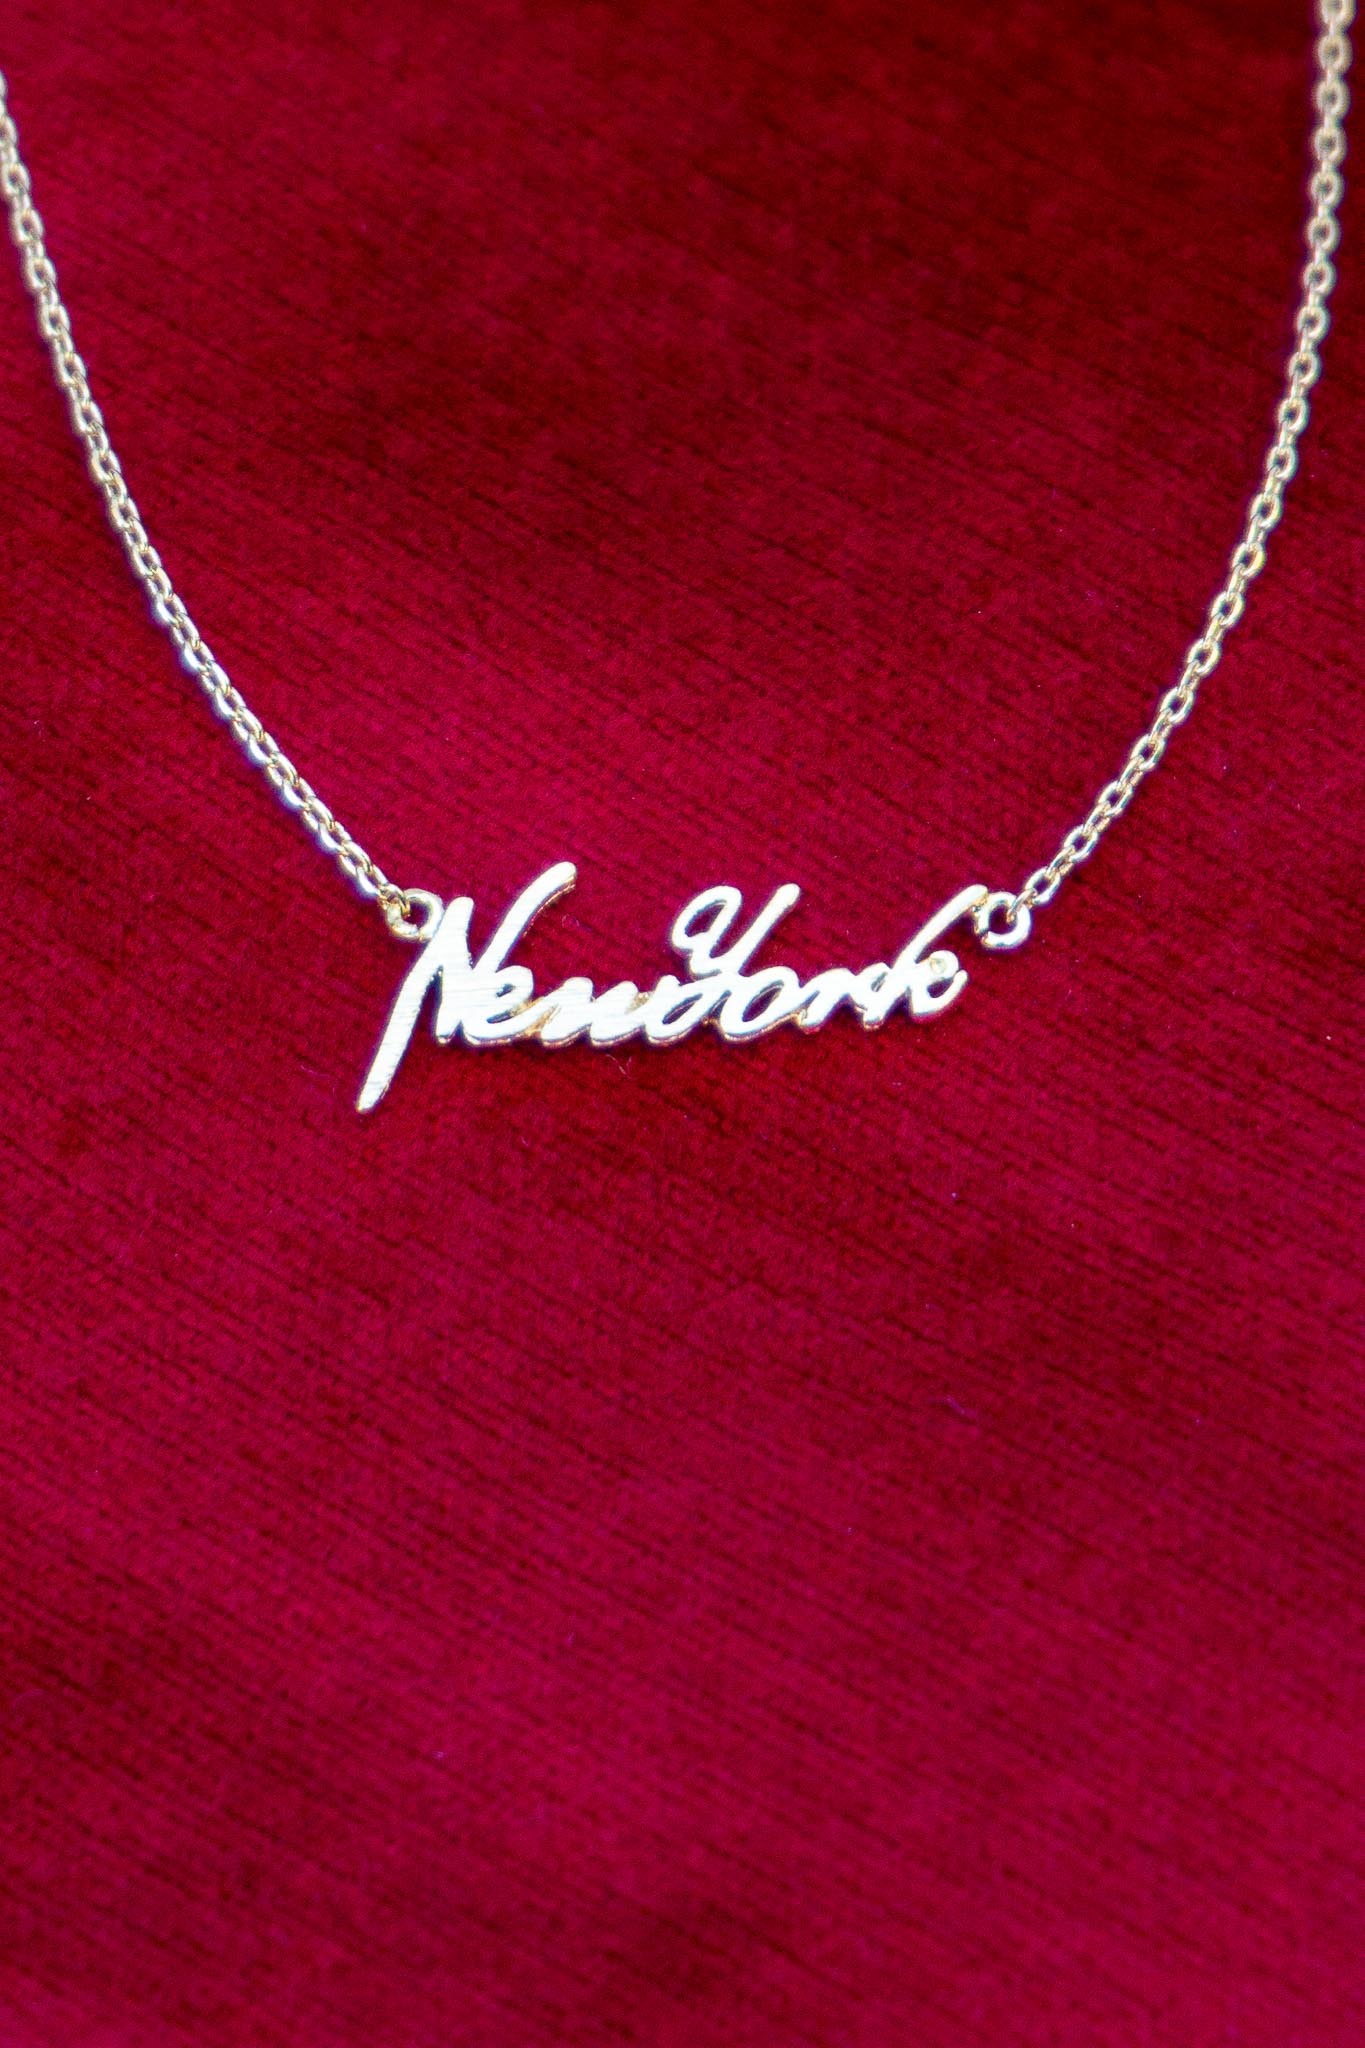 New York Script Necklace Jewelry Fame